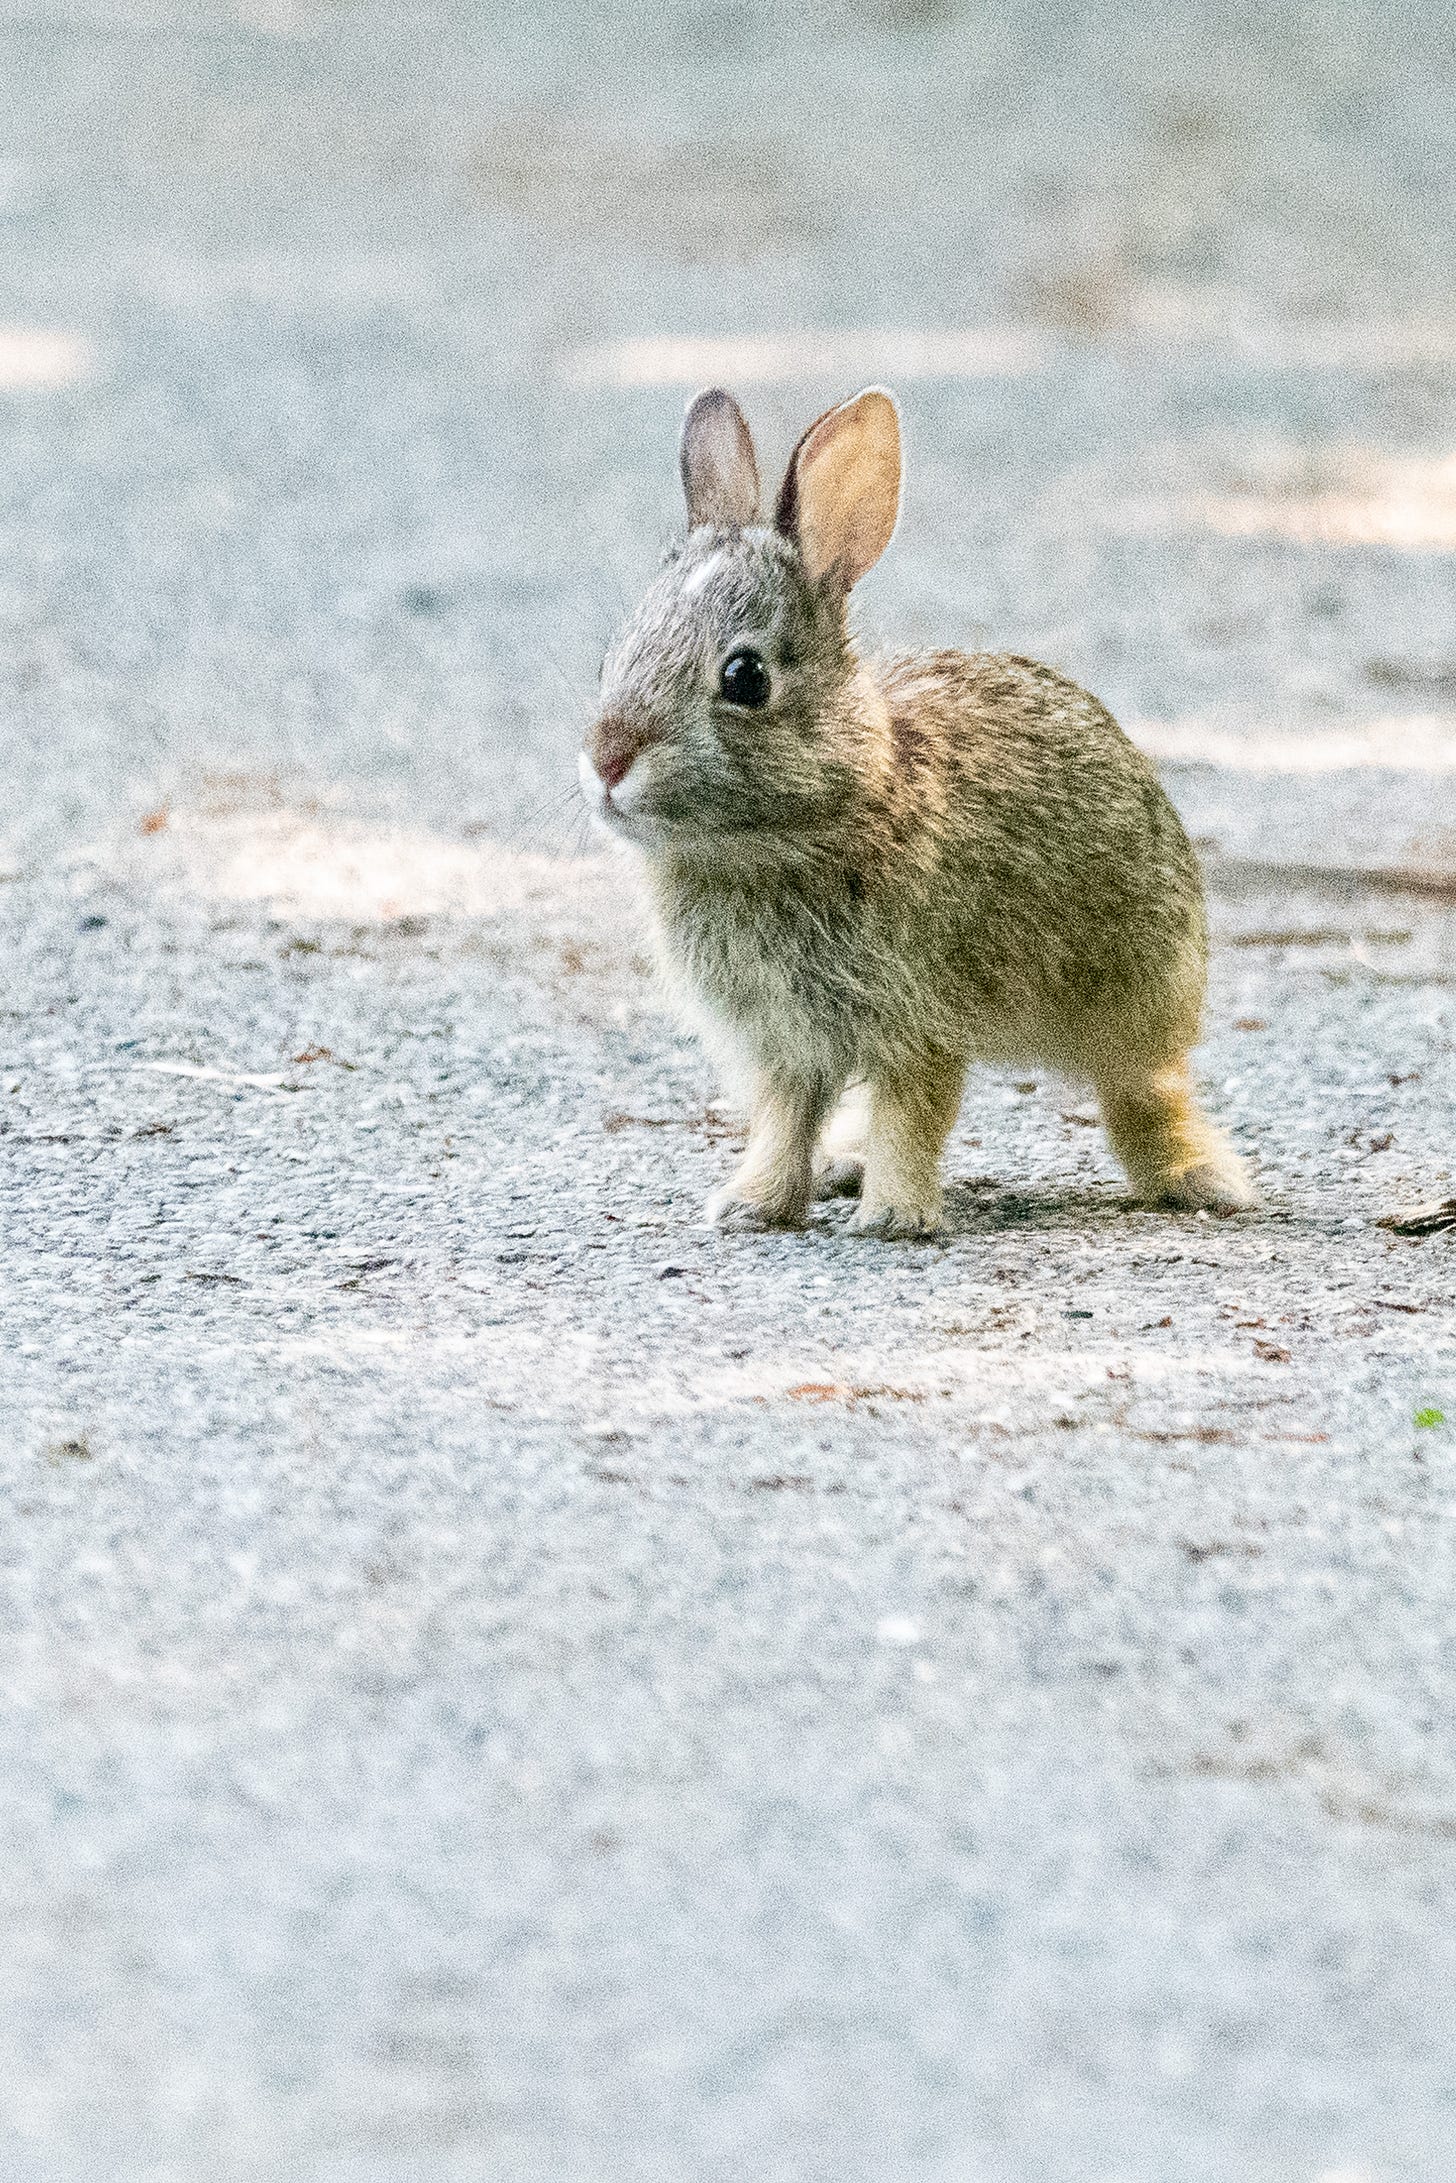 A baby rabbit, tiny ears raised, stands on a sidewalk, with an expression of impossible, internet-breaking cuteness